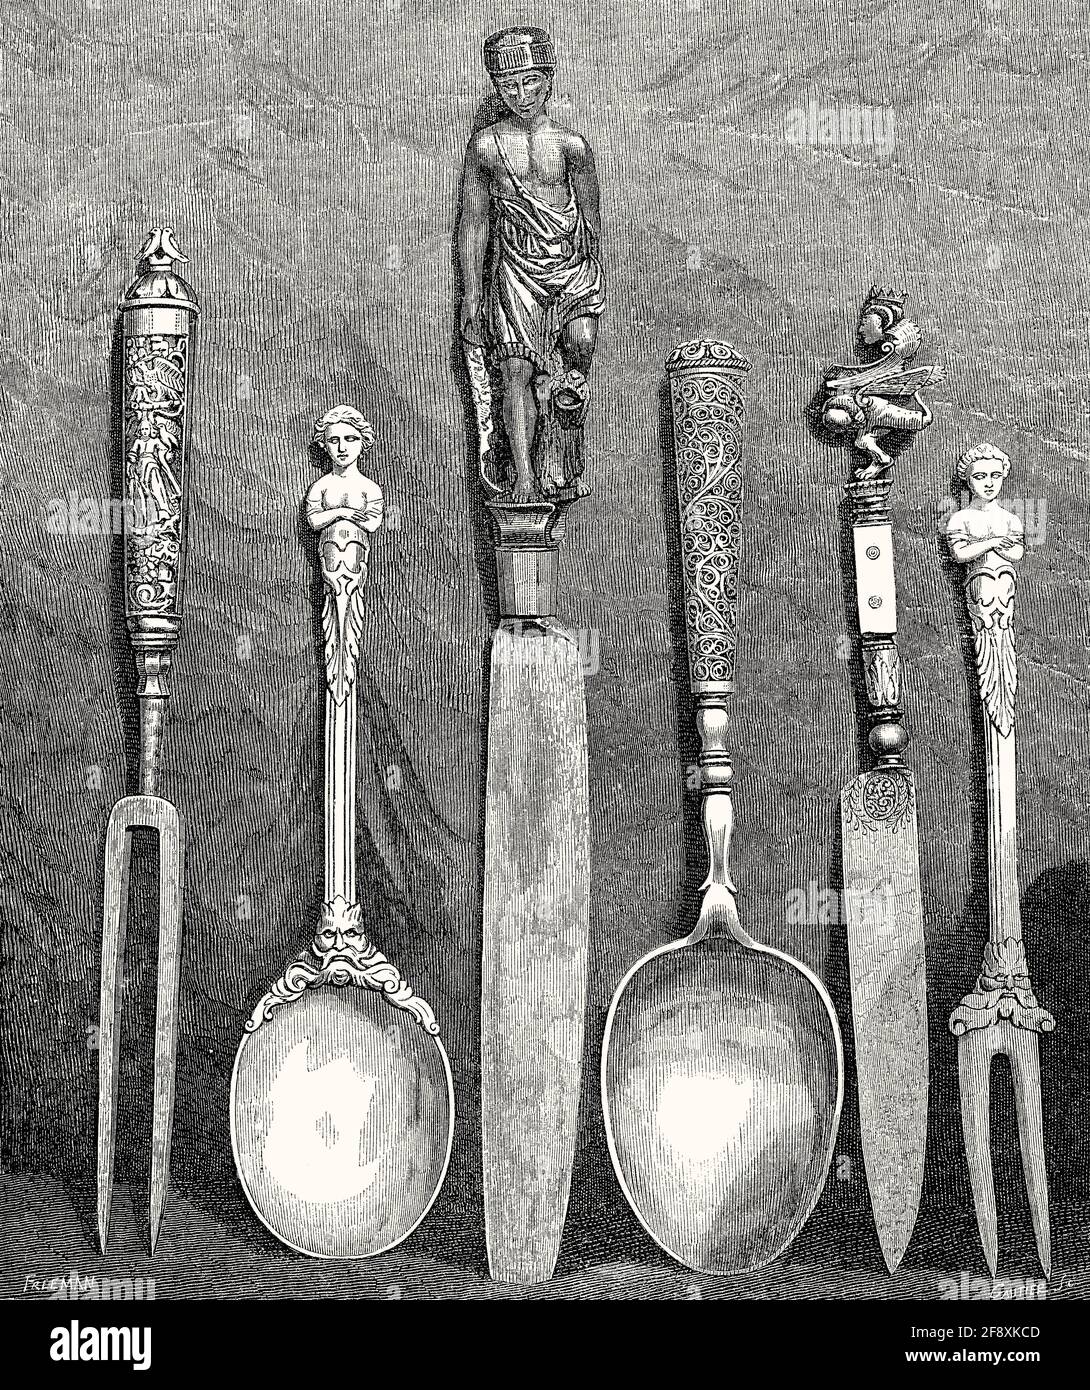 Cutlery, 16th and 17th century Stock Photo